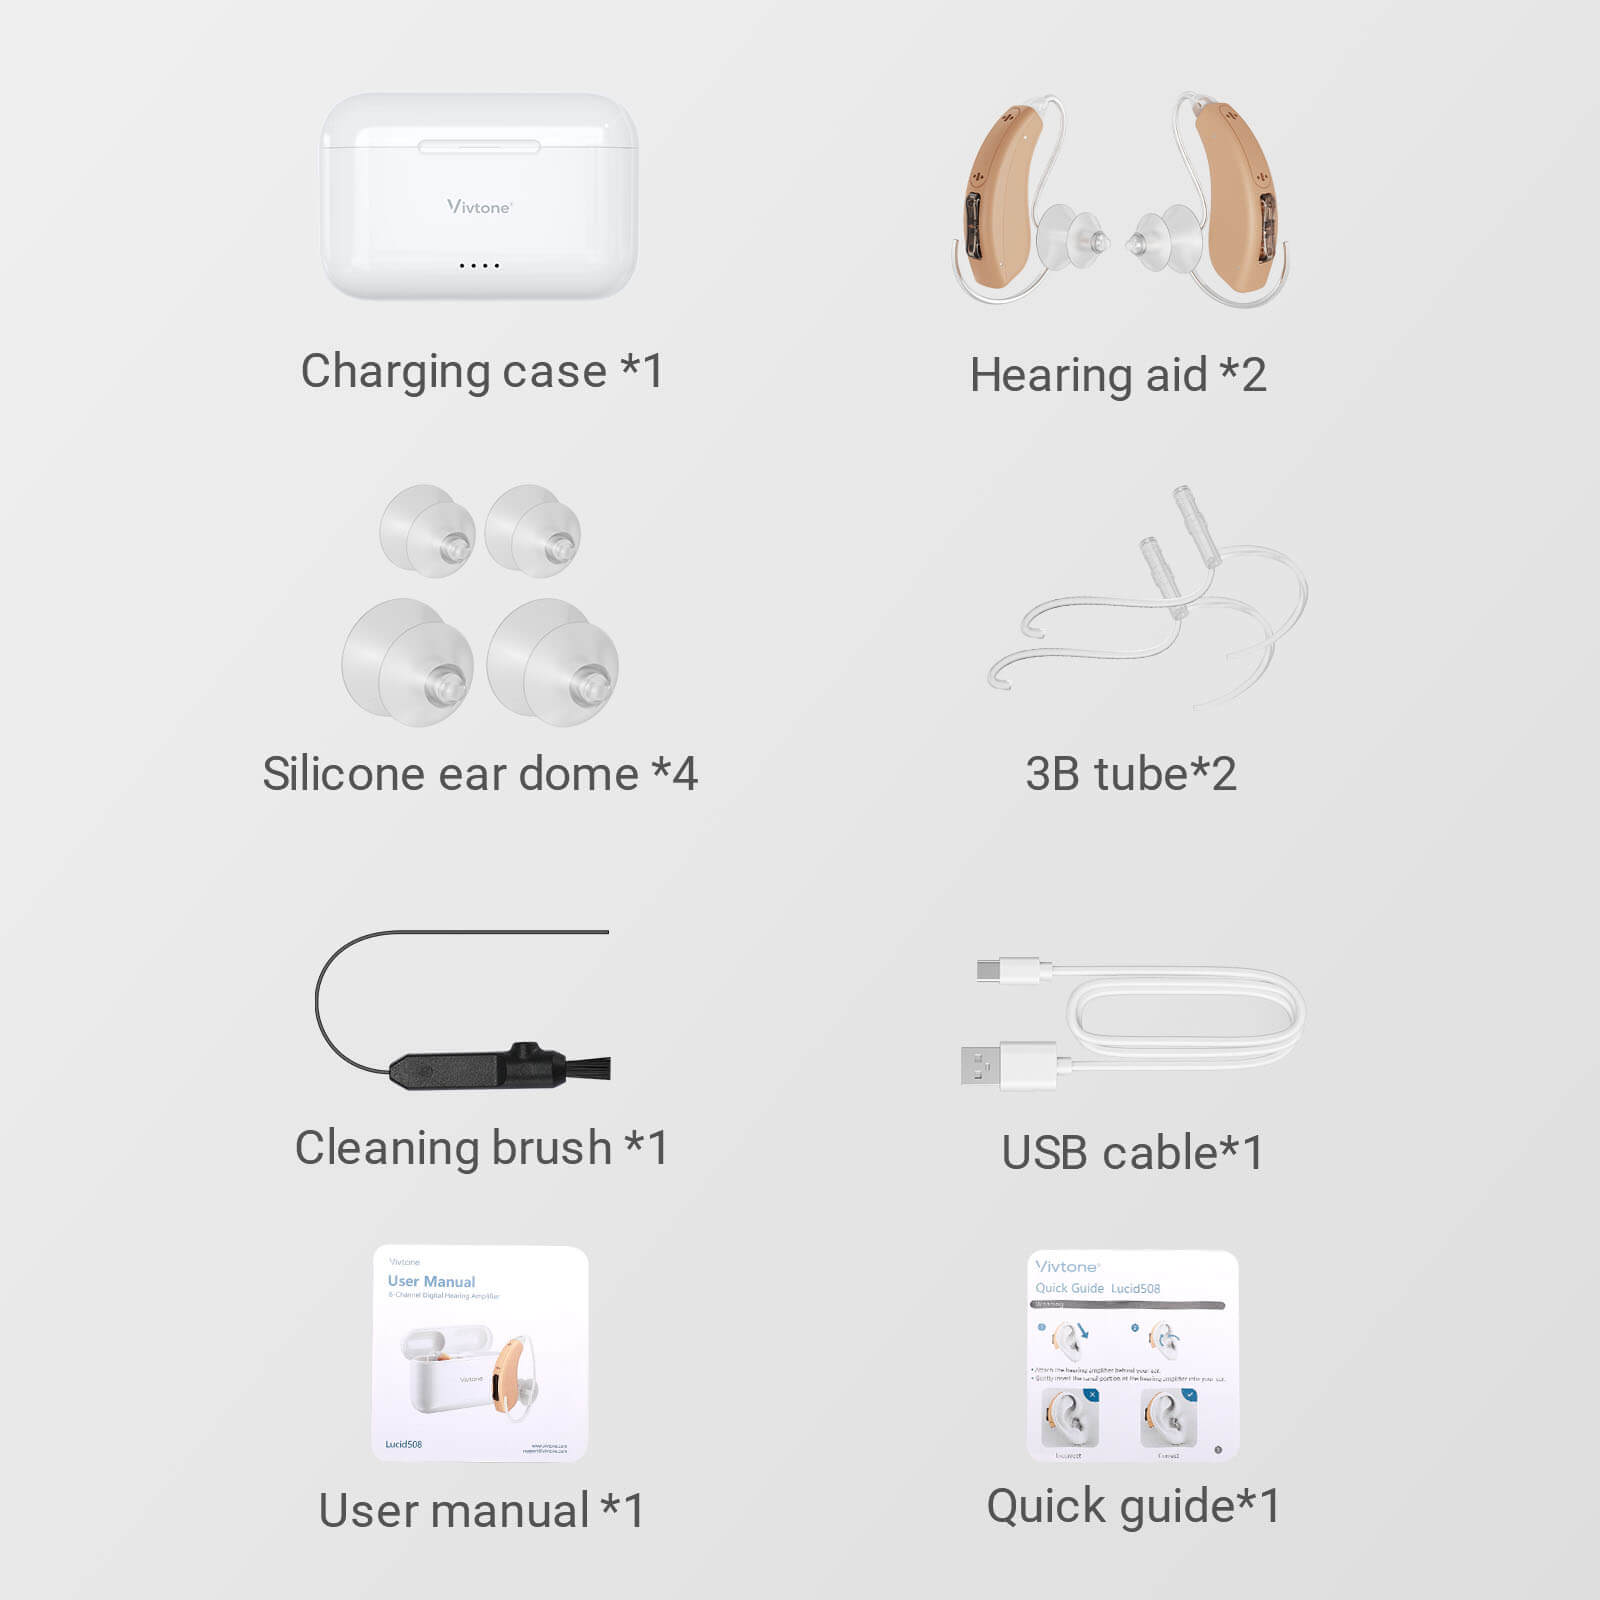 2023's Best Over-the-Counter Hearing Aids Available. Premium Hearing Instrument: Vivtone Lucid508a Hearing Aids